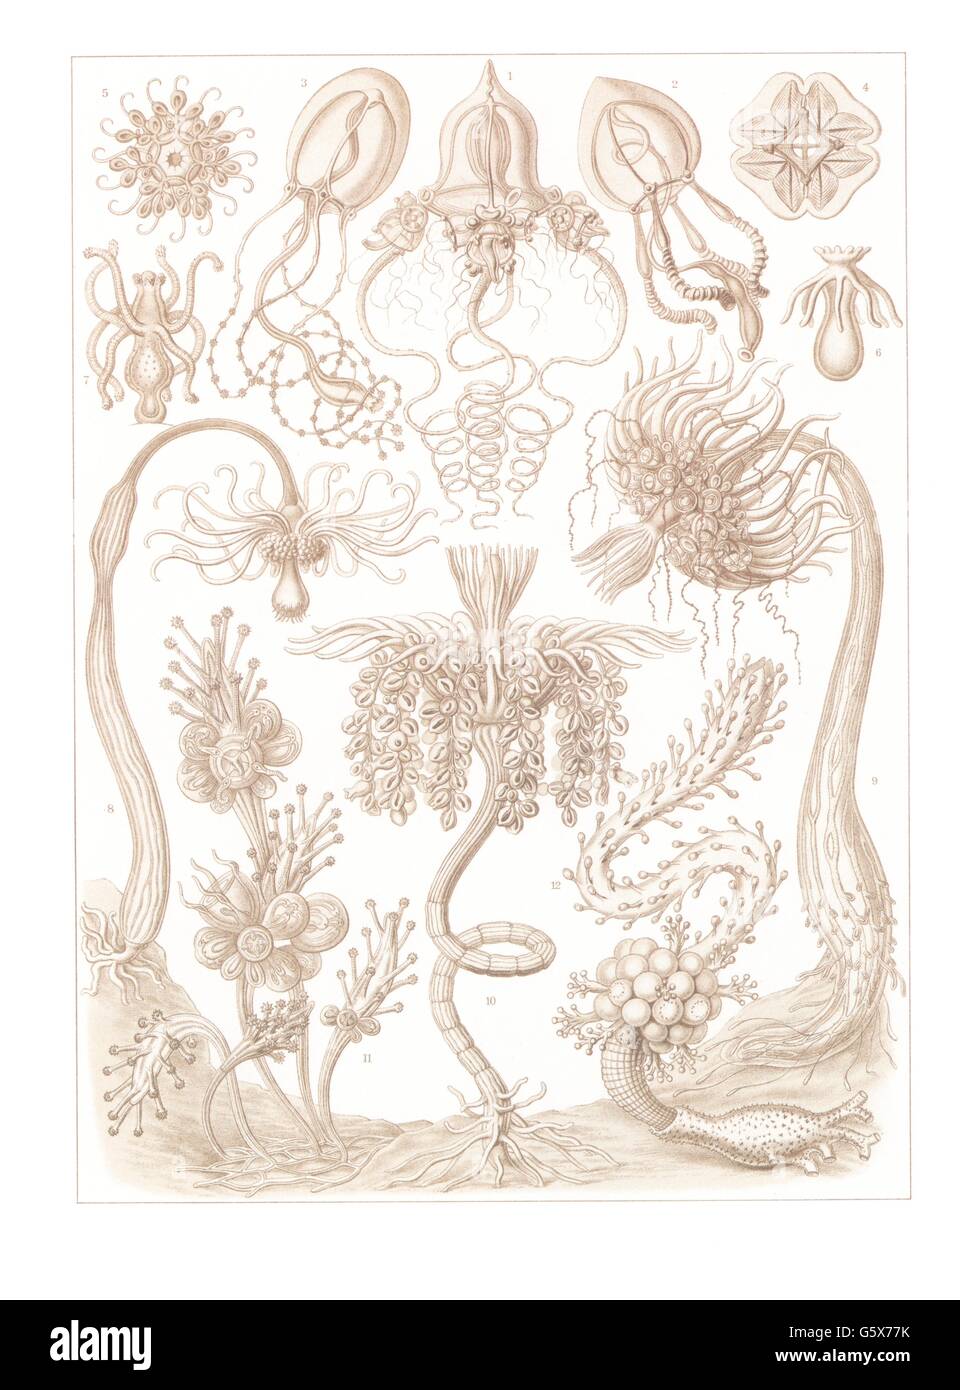 zoologie / Tiere, cnidaria, Tubularid hydroid (Tubulariae), Farblithographie, aus: Ernst Haeckel, 'Kunstformen der Natur', Leipzig - Wien, 1899 - 1904, Additional-Rights-Clearences-not available Stockfoto